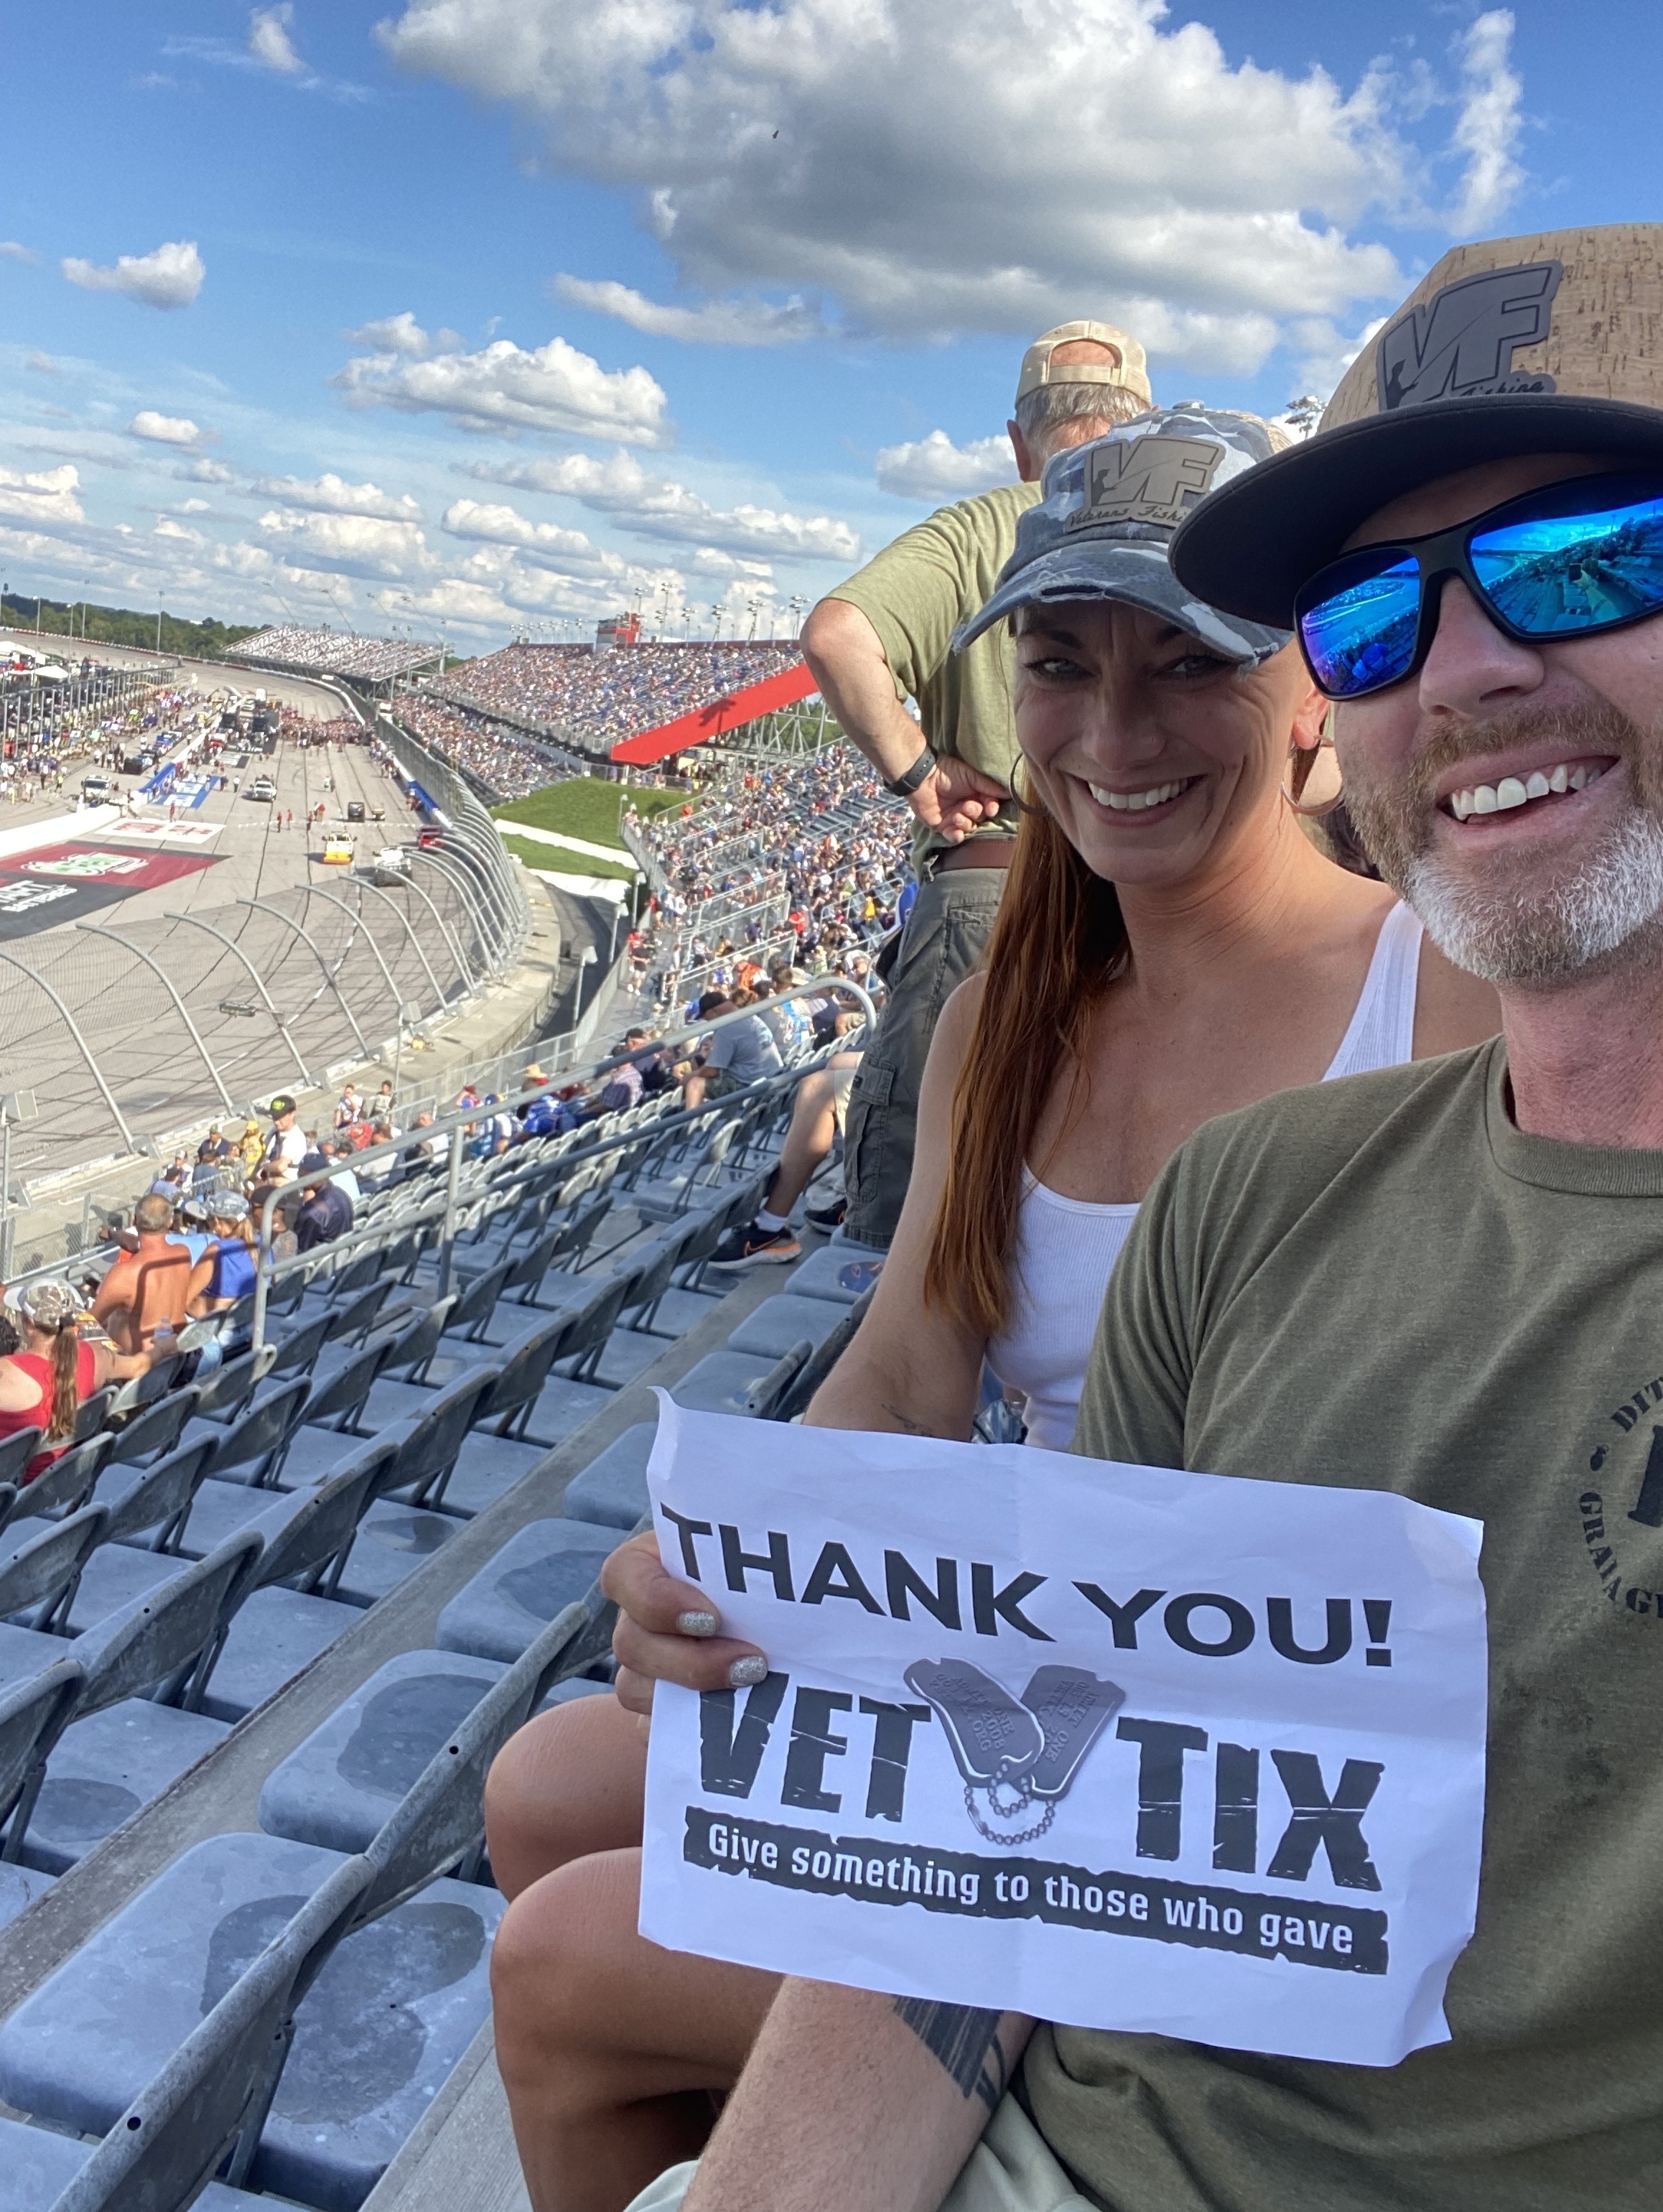 Thank You Messages To Veteran Tickets Foundation Donors